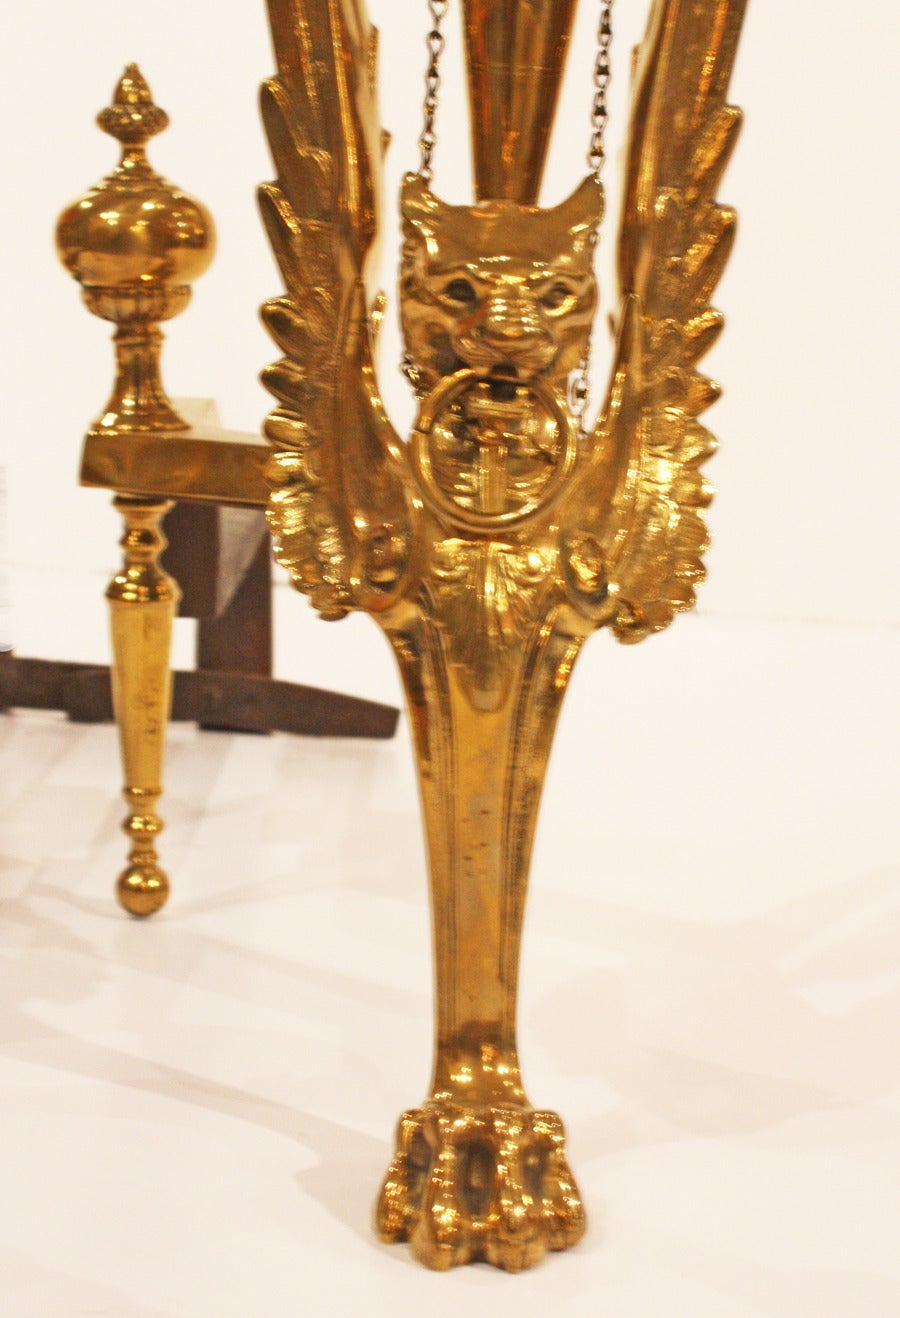 French Chenets or Andirons